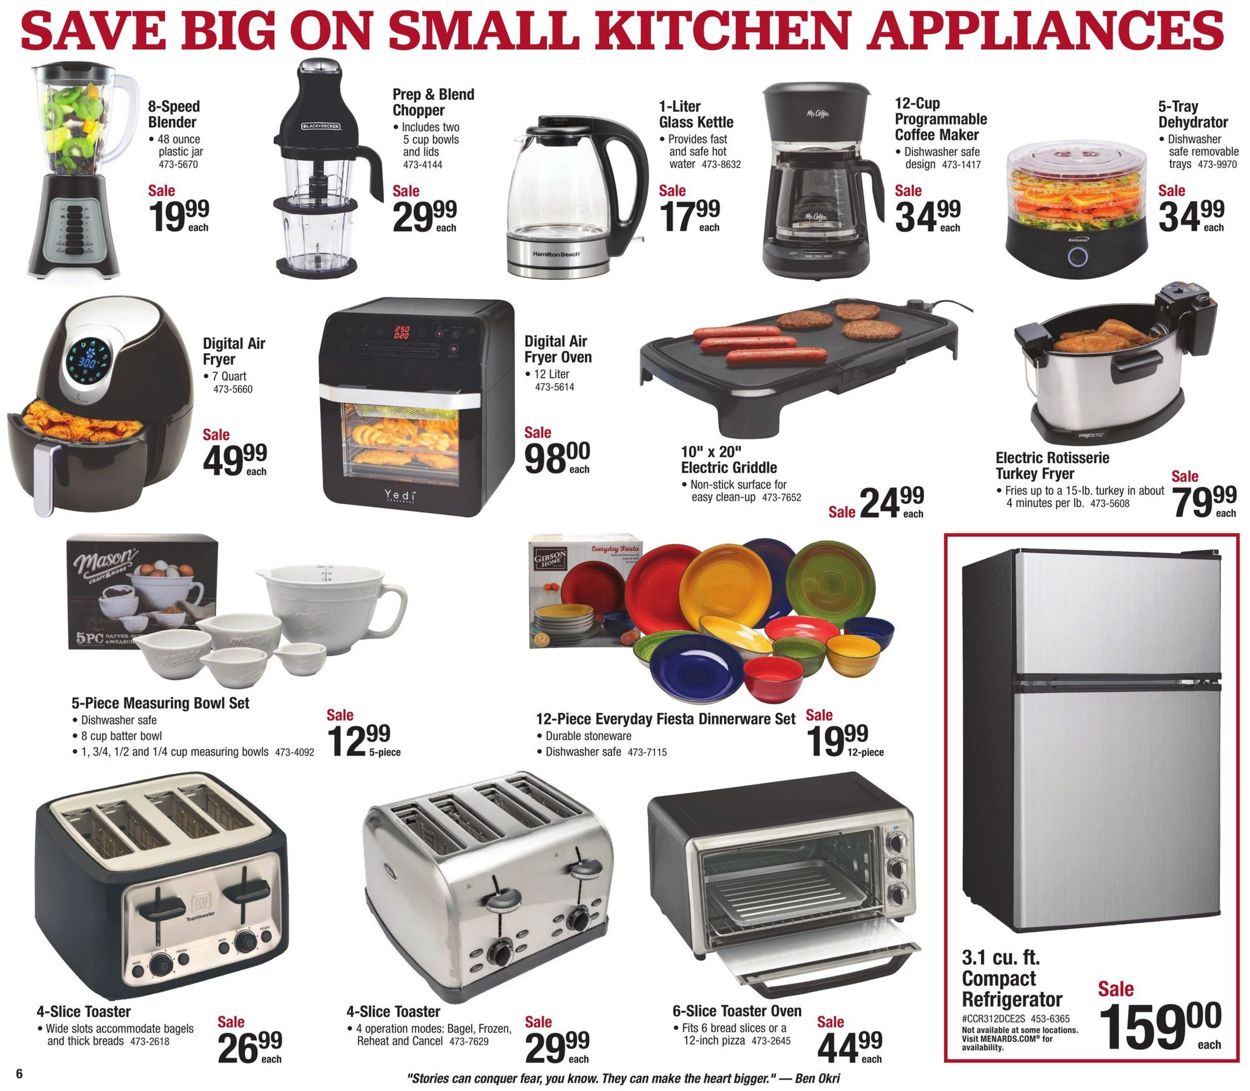 menards-last-minute-gift-sale-2020-current-weekly-ad-12-15-12-24-2020